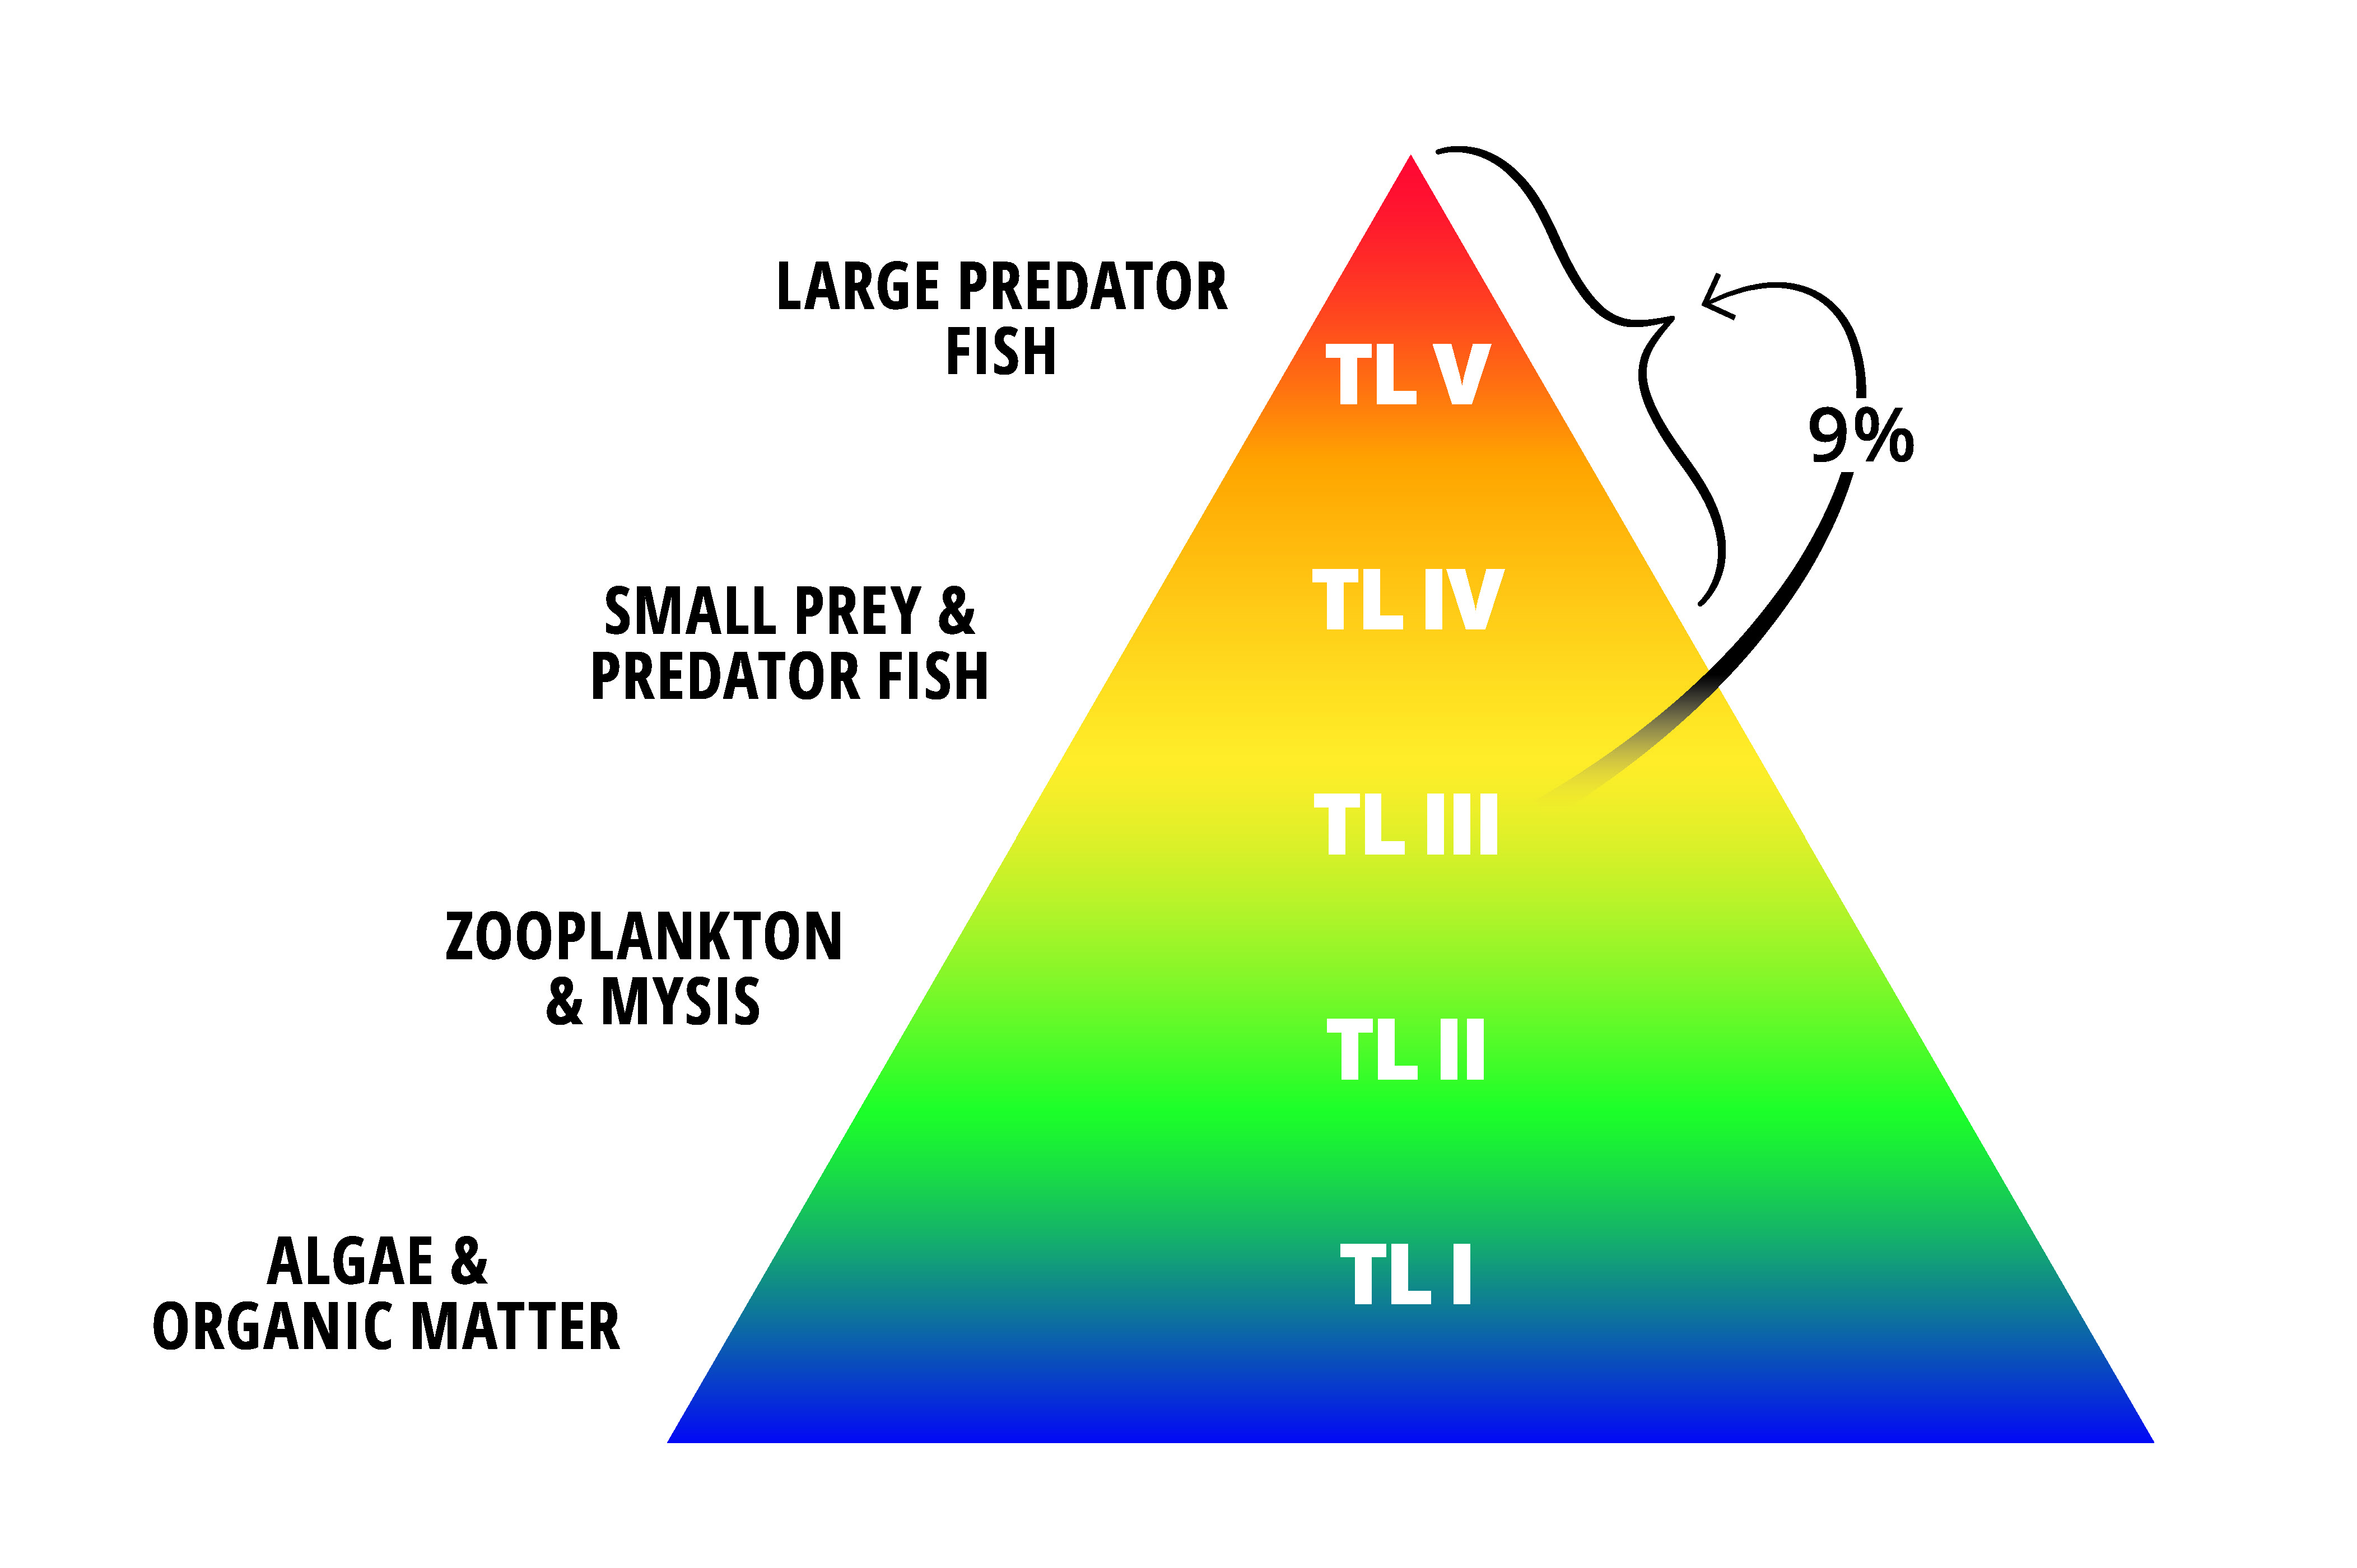 Tropic pyramid with the top TL4 and TL5 areas showing as 9%